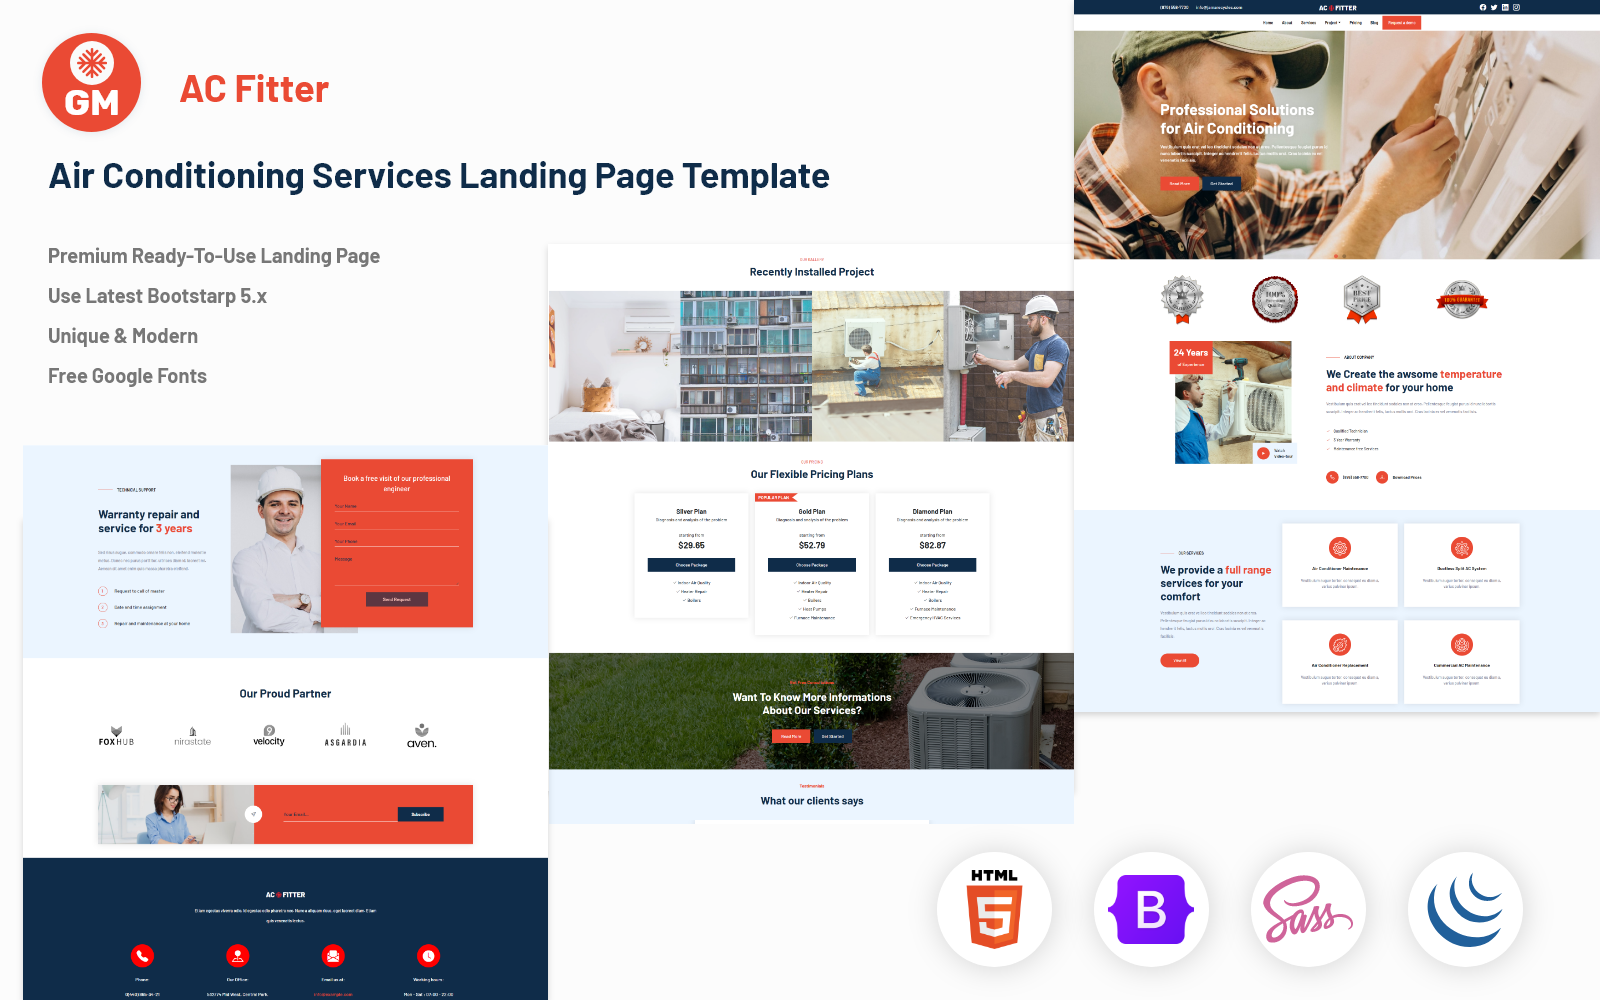 AC Fitter - Air Conditioning Services Landing Page Template